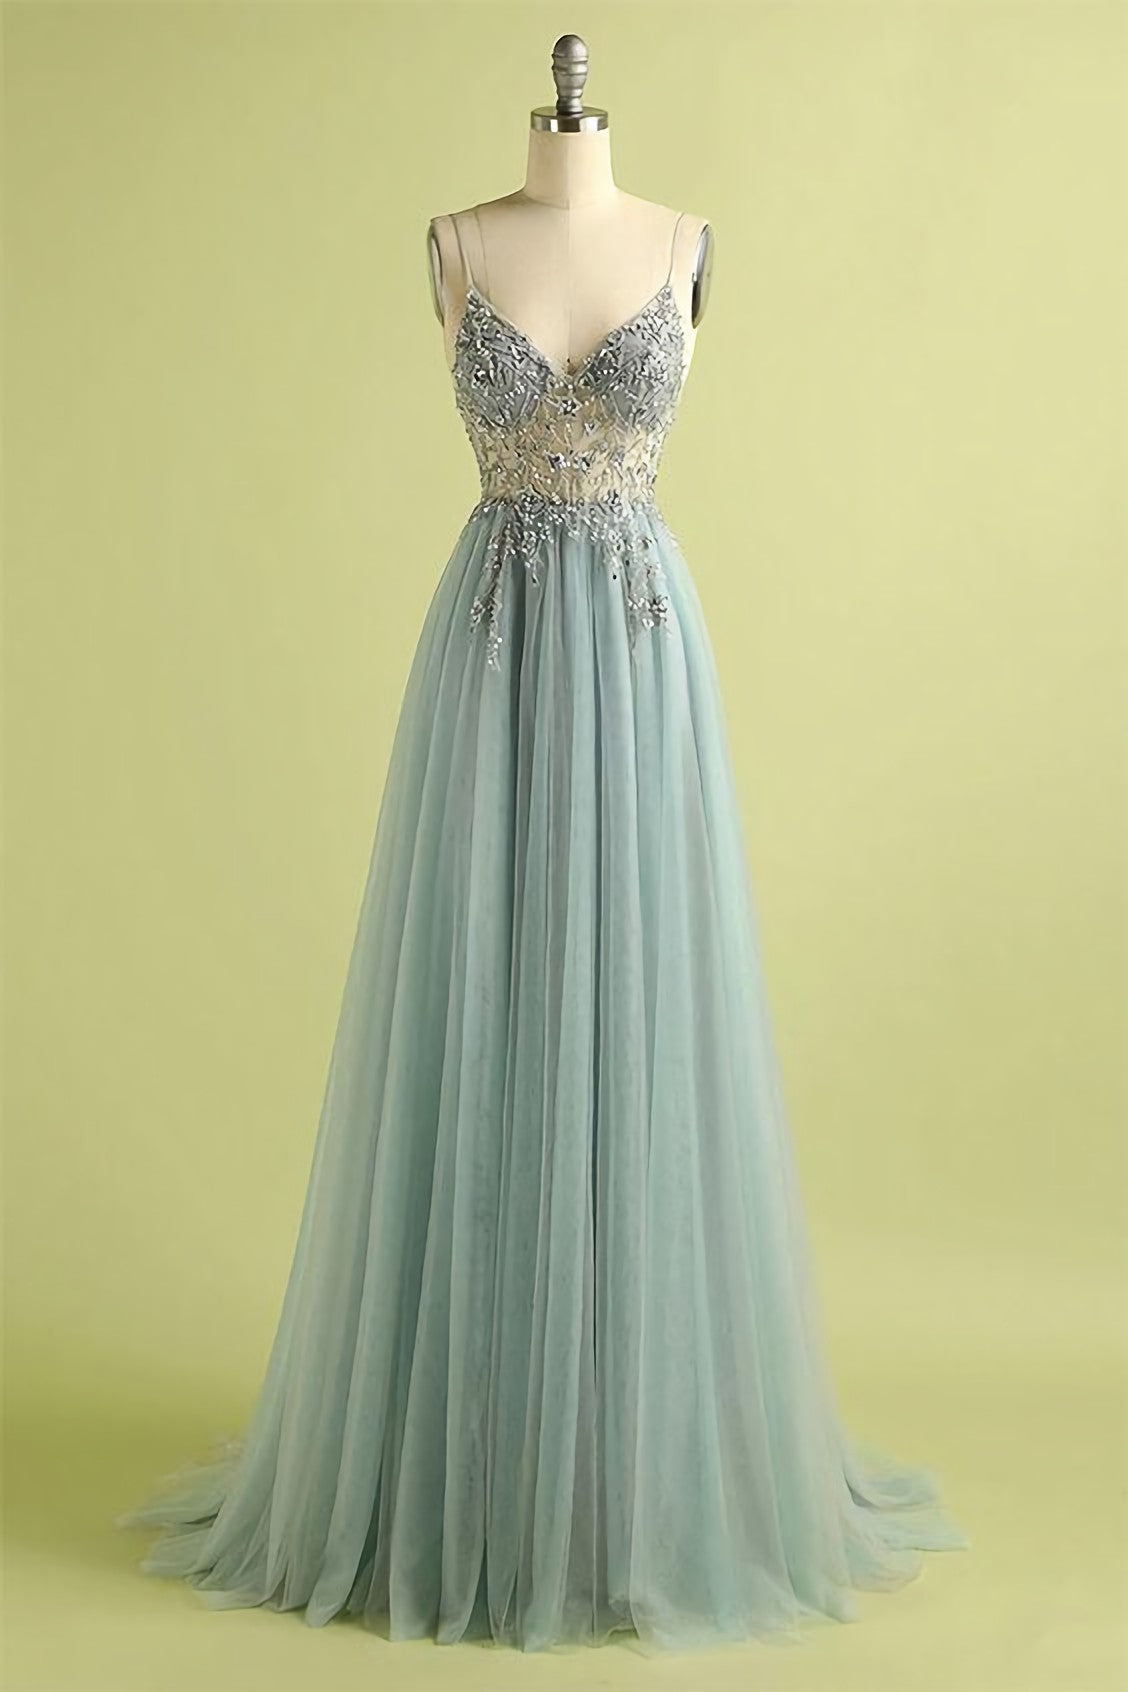 Party Dress Stores, Long Prom Dress, Inspiration Junior Prom Gowns